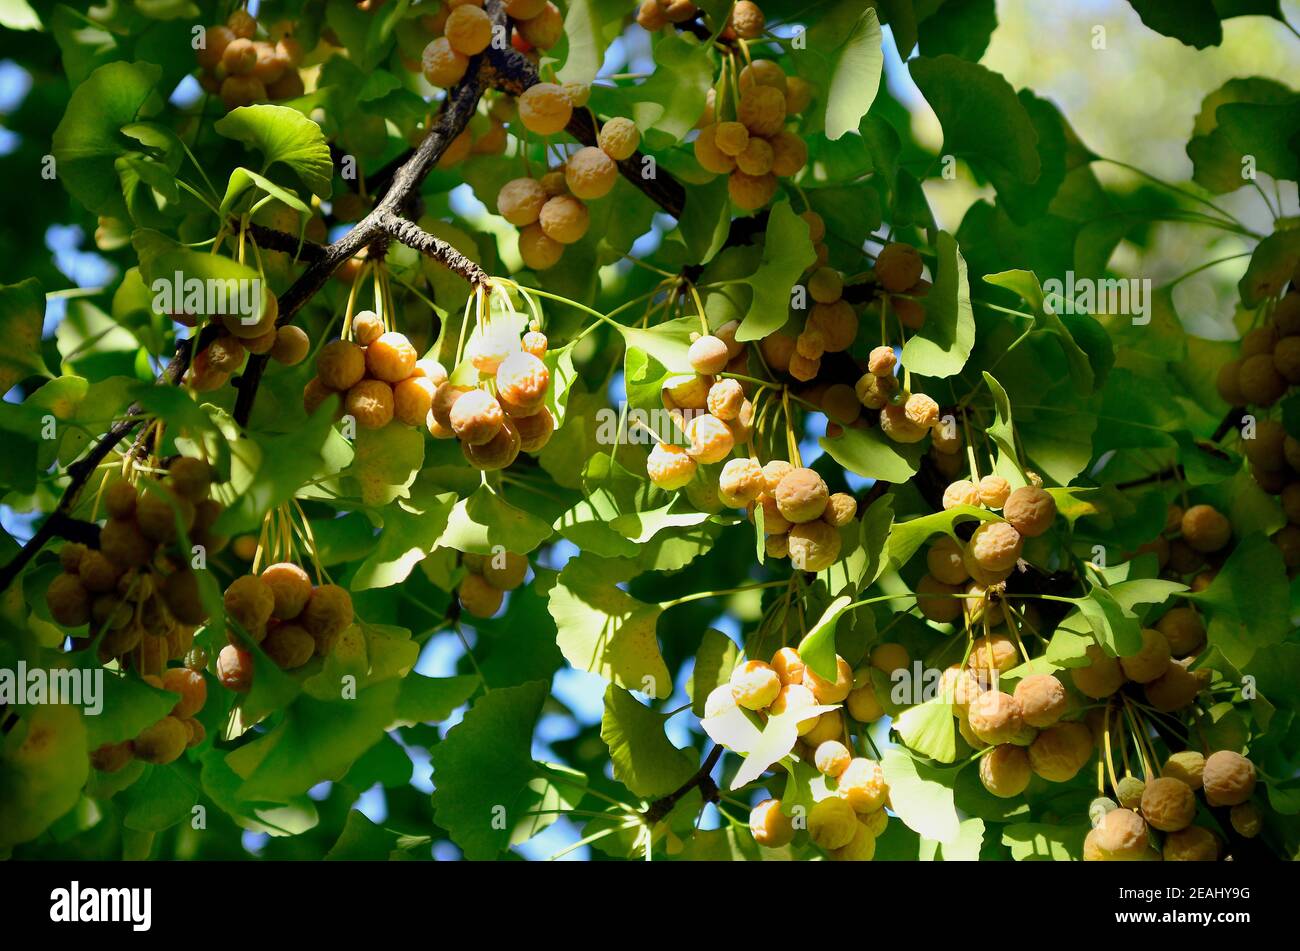 fruits and leaves of Ginkgo tree Stock Photo